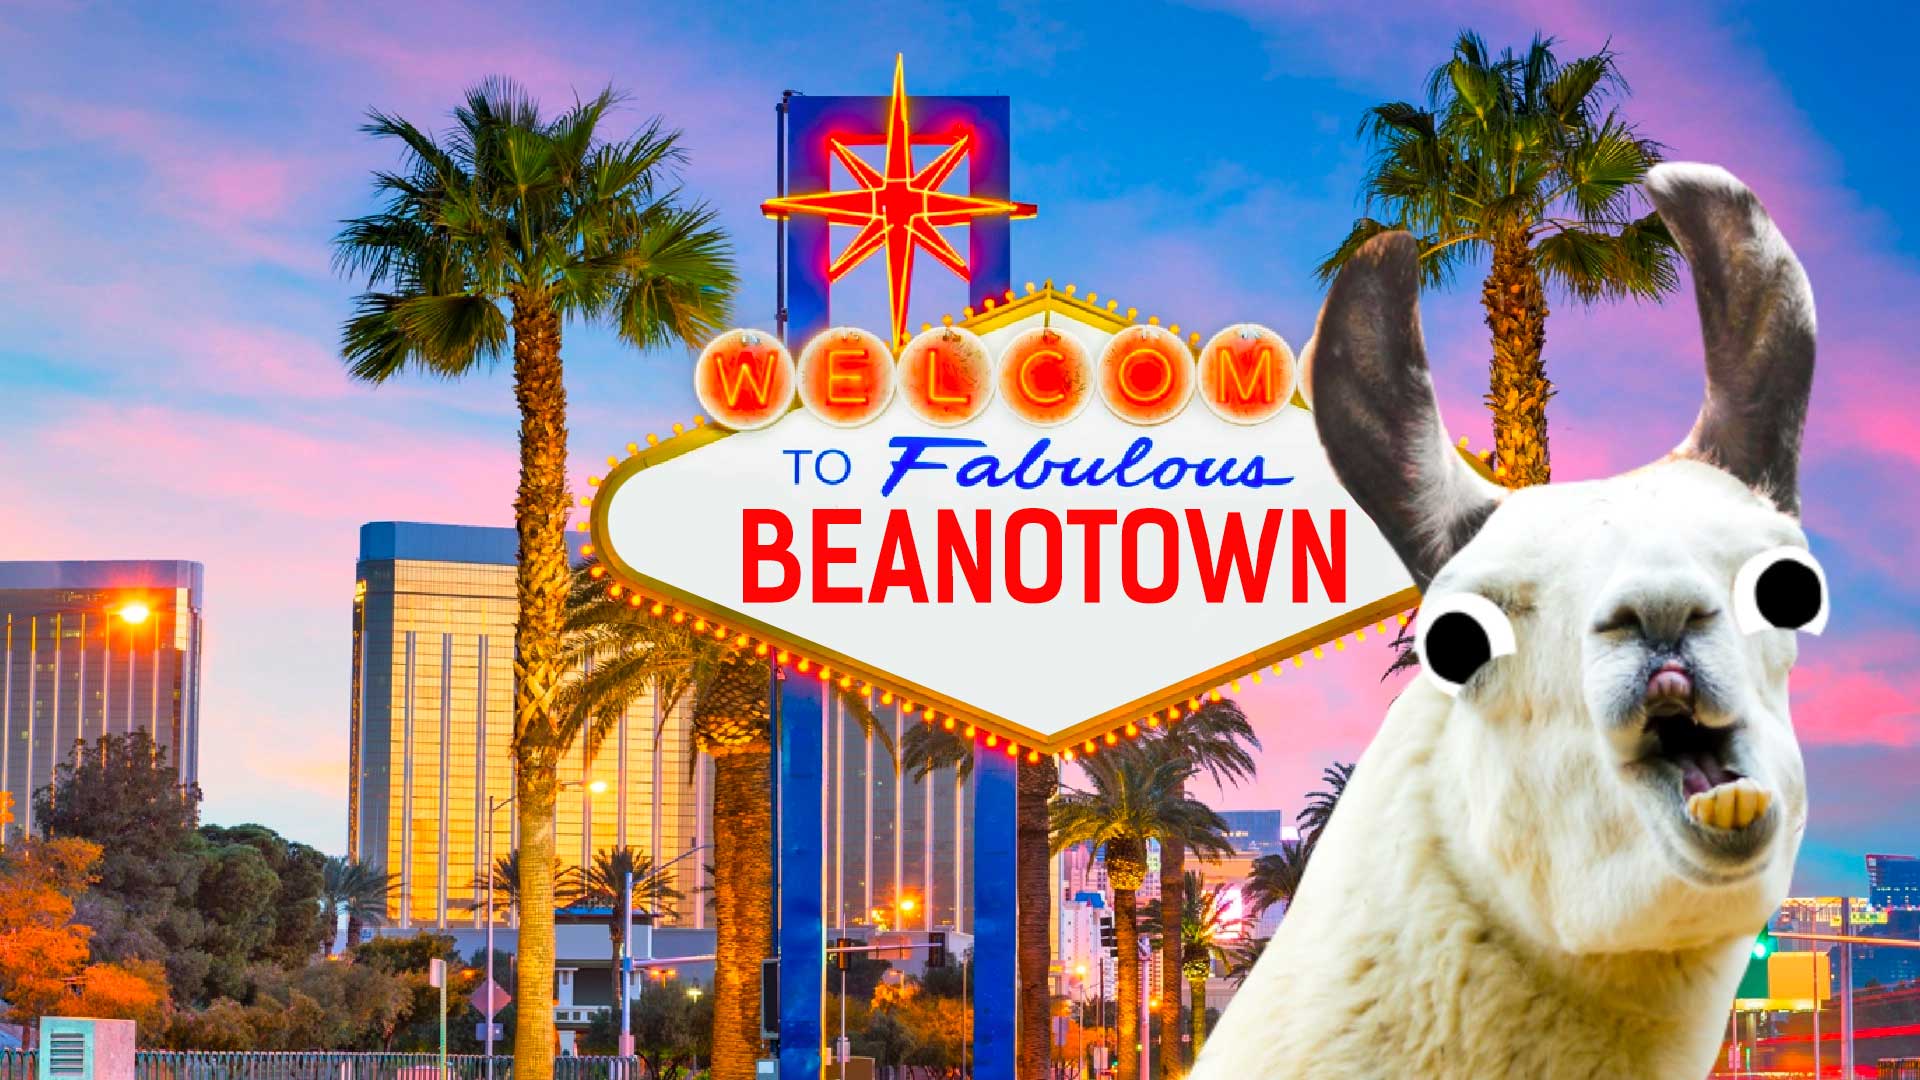 A sign saying Welcome to Fabulous Beanotown – with a llama at the front of the image